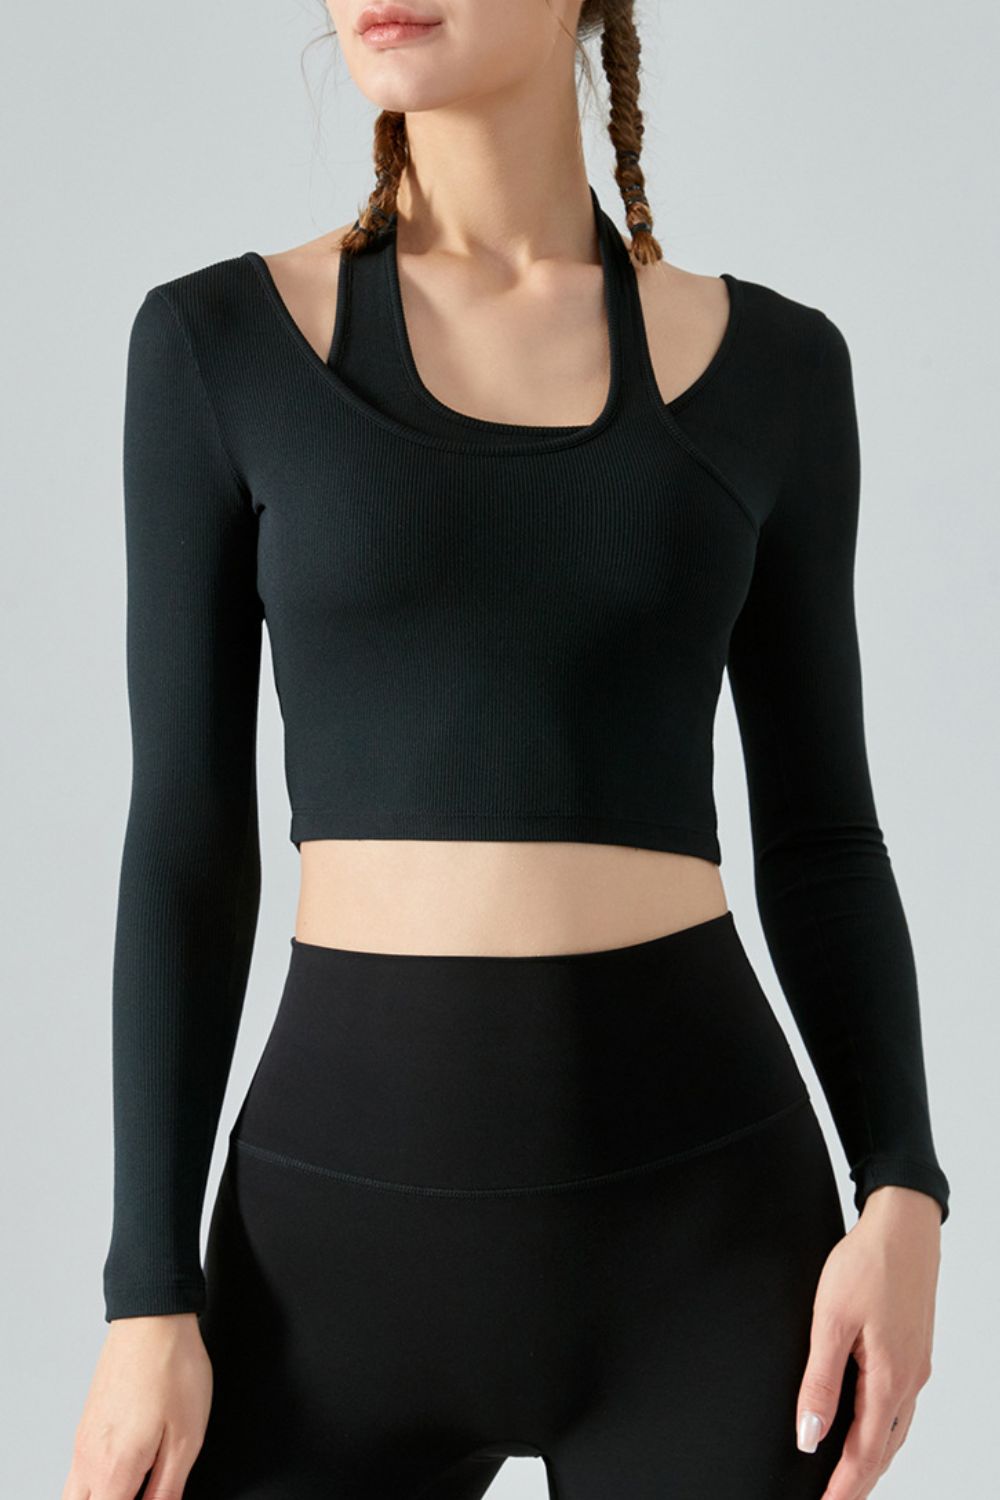 Halter Neck Long Sleeve Cropped Sports Top- stretchy long sleeves